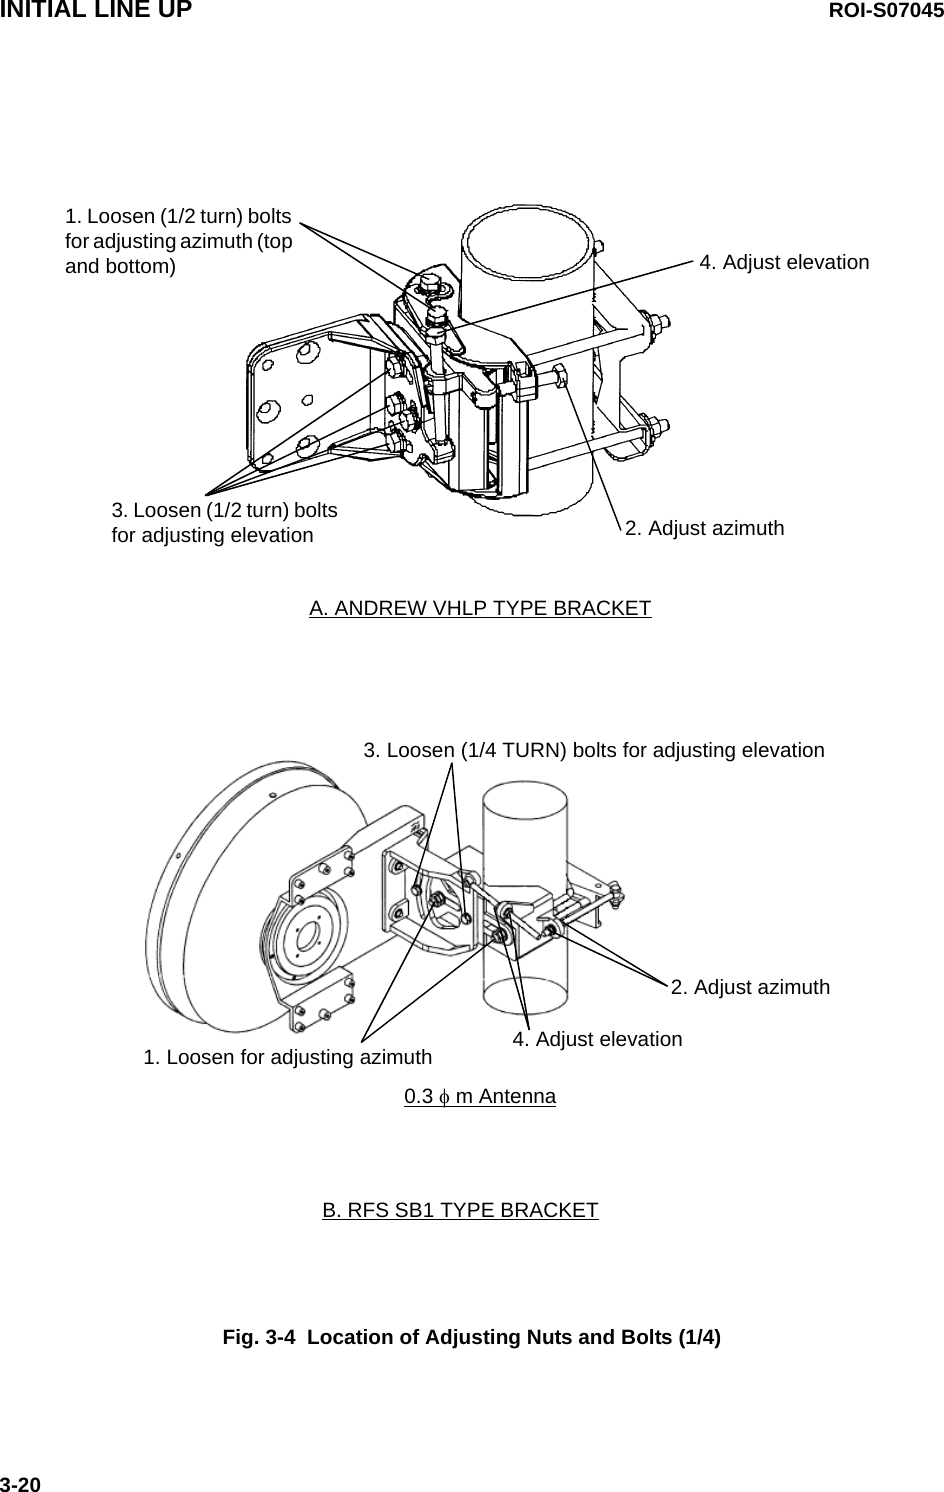 INITIAL LINE UP ROI-S070453-20Fig. 3-4  Location of Adjusting Nuts and Bolts (1/4)1. Loosen for adjusting azimuth2. Adjust azimuth3. Loosen (1/4 TURN) bolts for adjusting elevation0.3 φ m AntennaB. RFS SB1 TYPE BRACKET4. Adjust elevation2. Adjust azimuth1. Loosen (1/2 turn) bolts for adjusting azimuth (top and bottom)3. Loosen (1/2 turn) bolts for adjusting elevation4. Adjust elevationA. ANDREW VHLP TYPE BRACKET